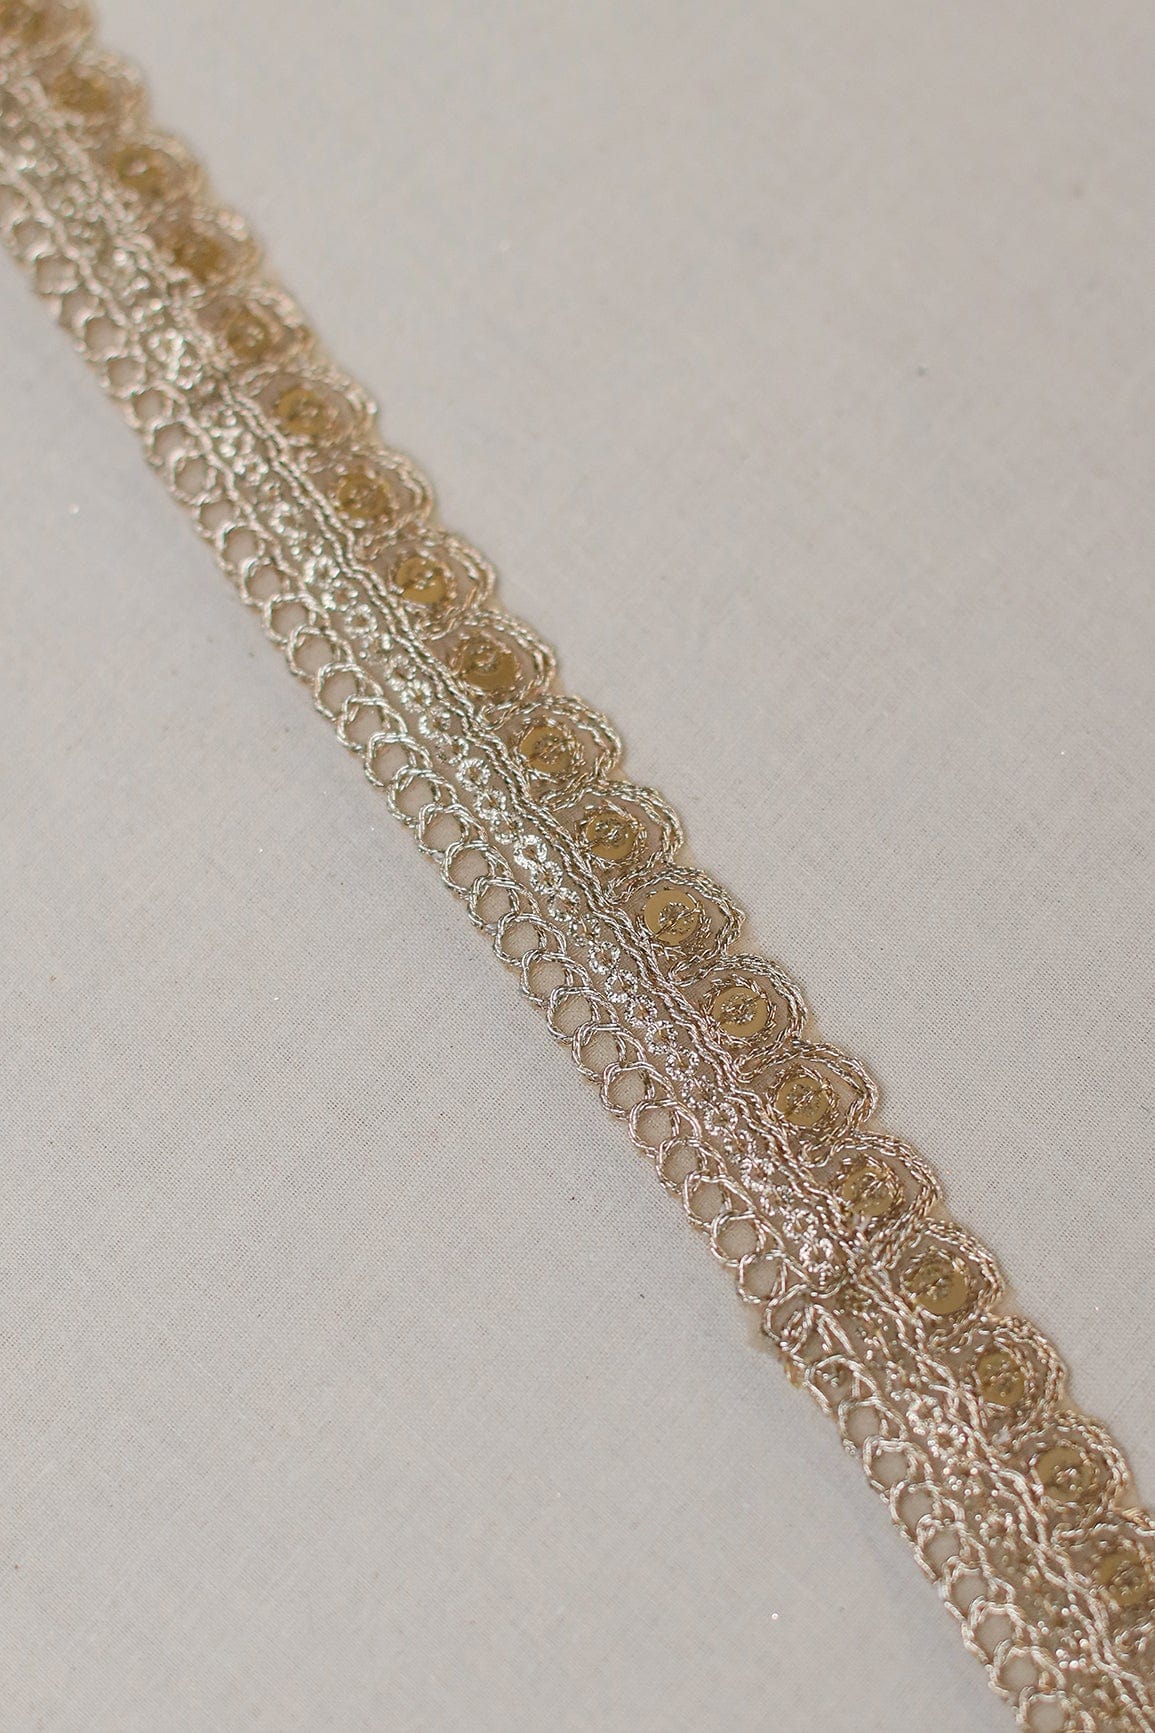 doeraa Laces Gold Zari With Gold Sequins Embroidered Scallop Lace (9 Meters)